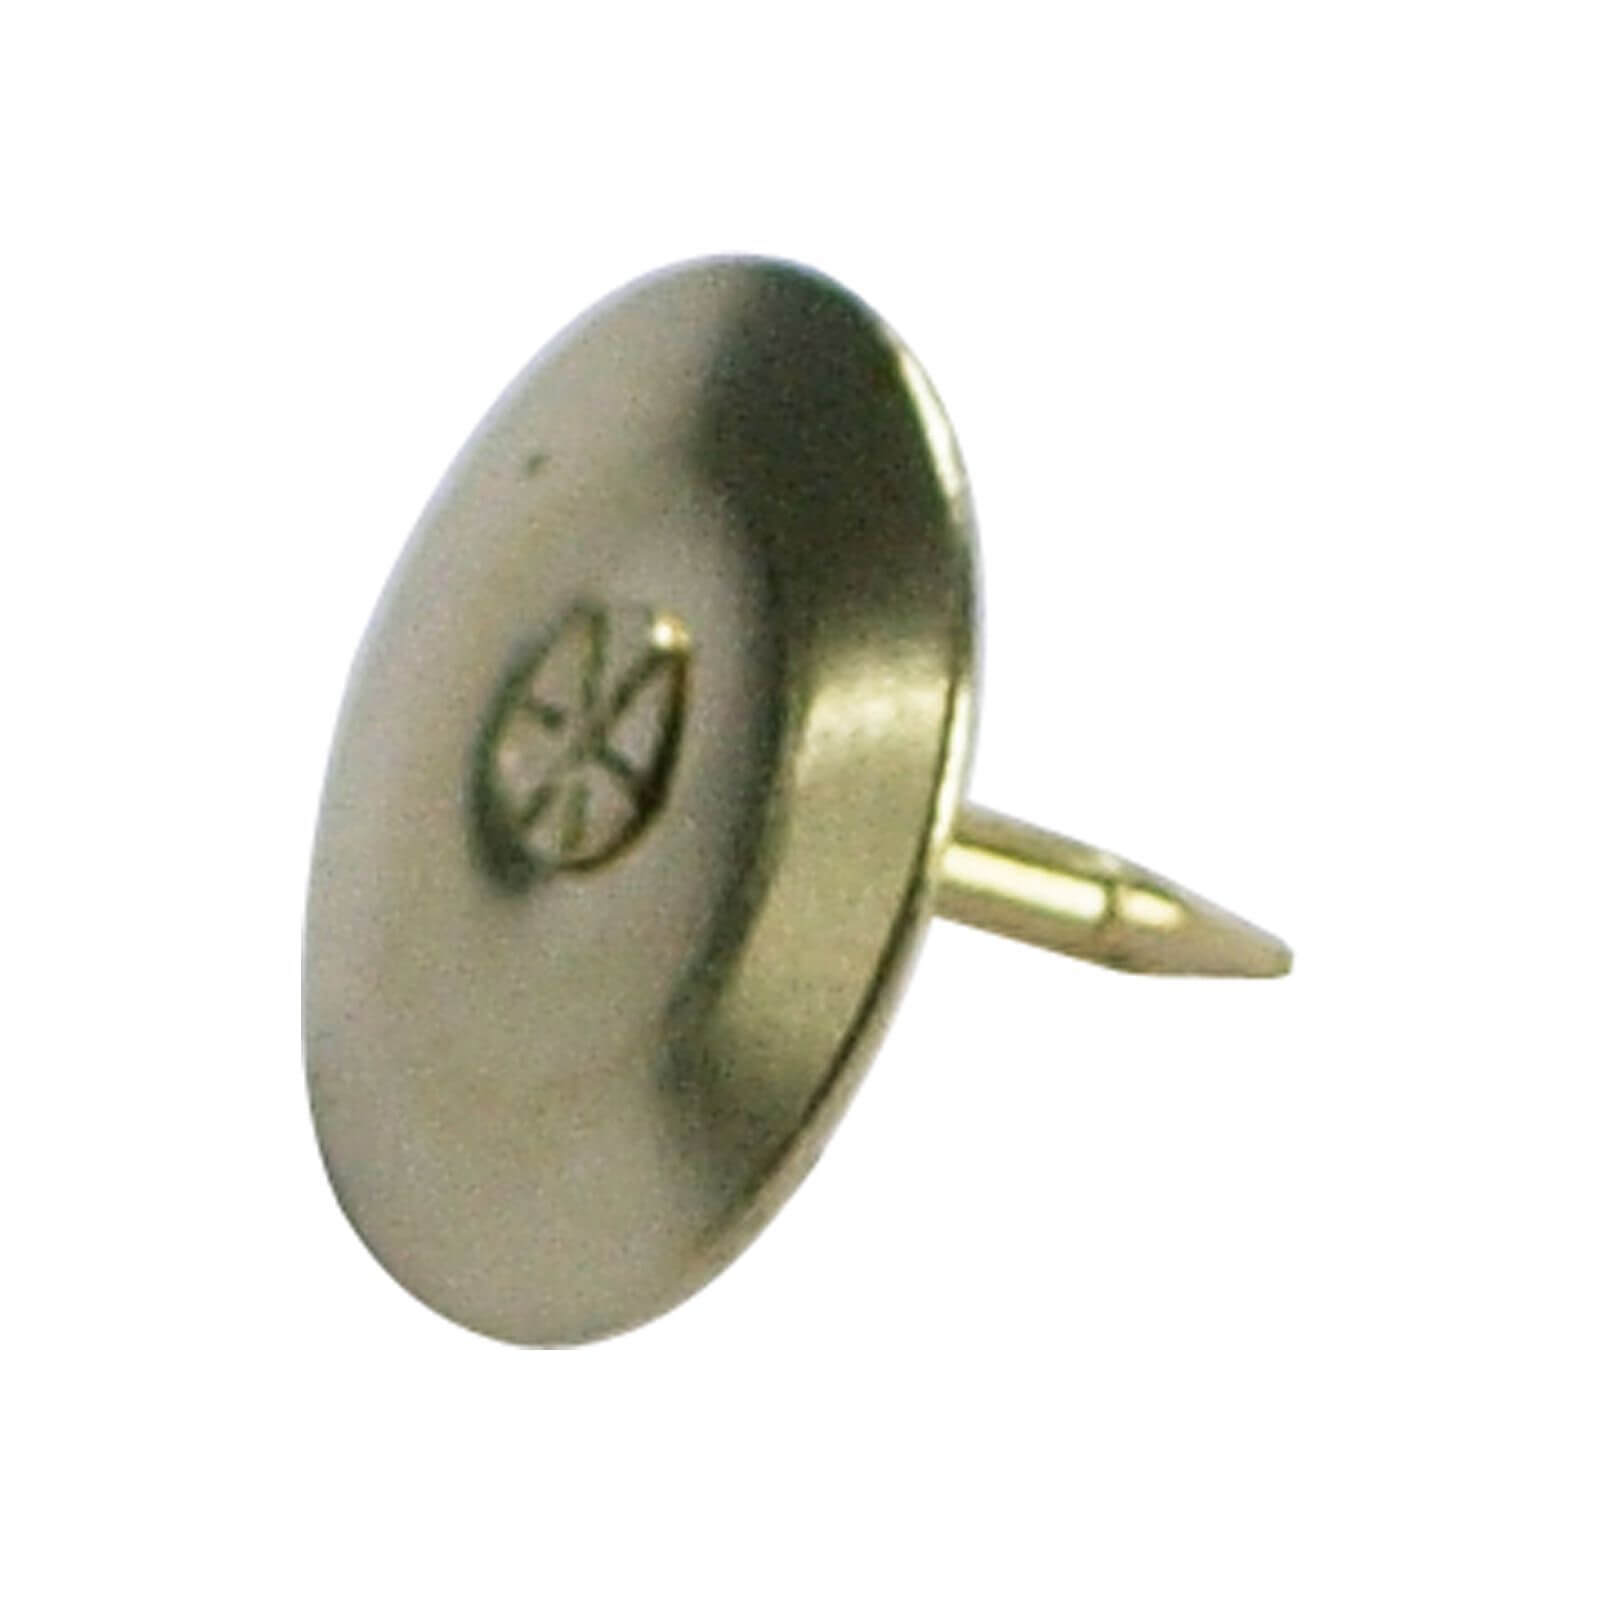 Brass Plated Drawing Pins - 100 Pack